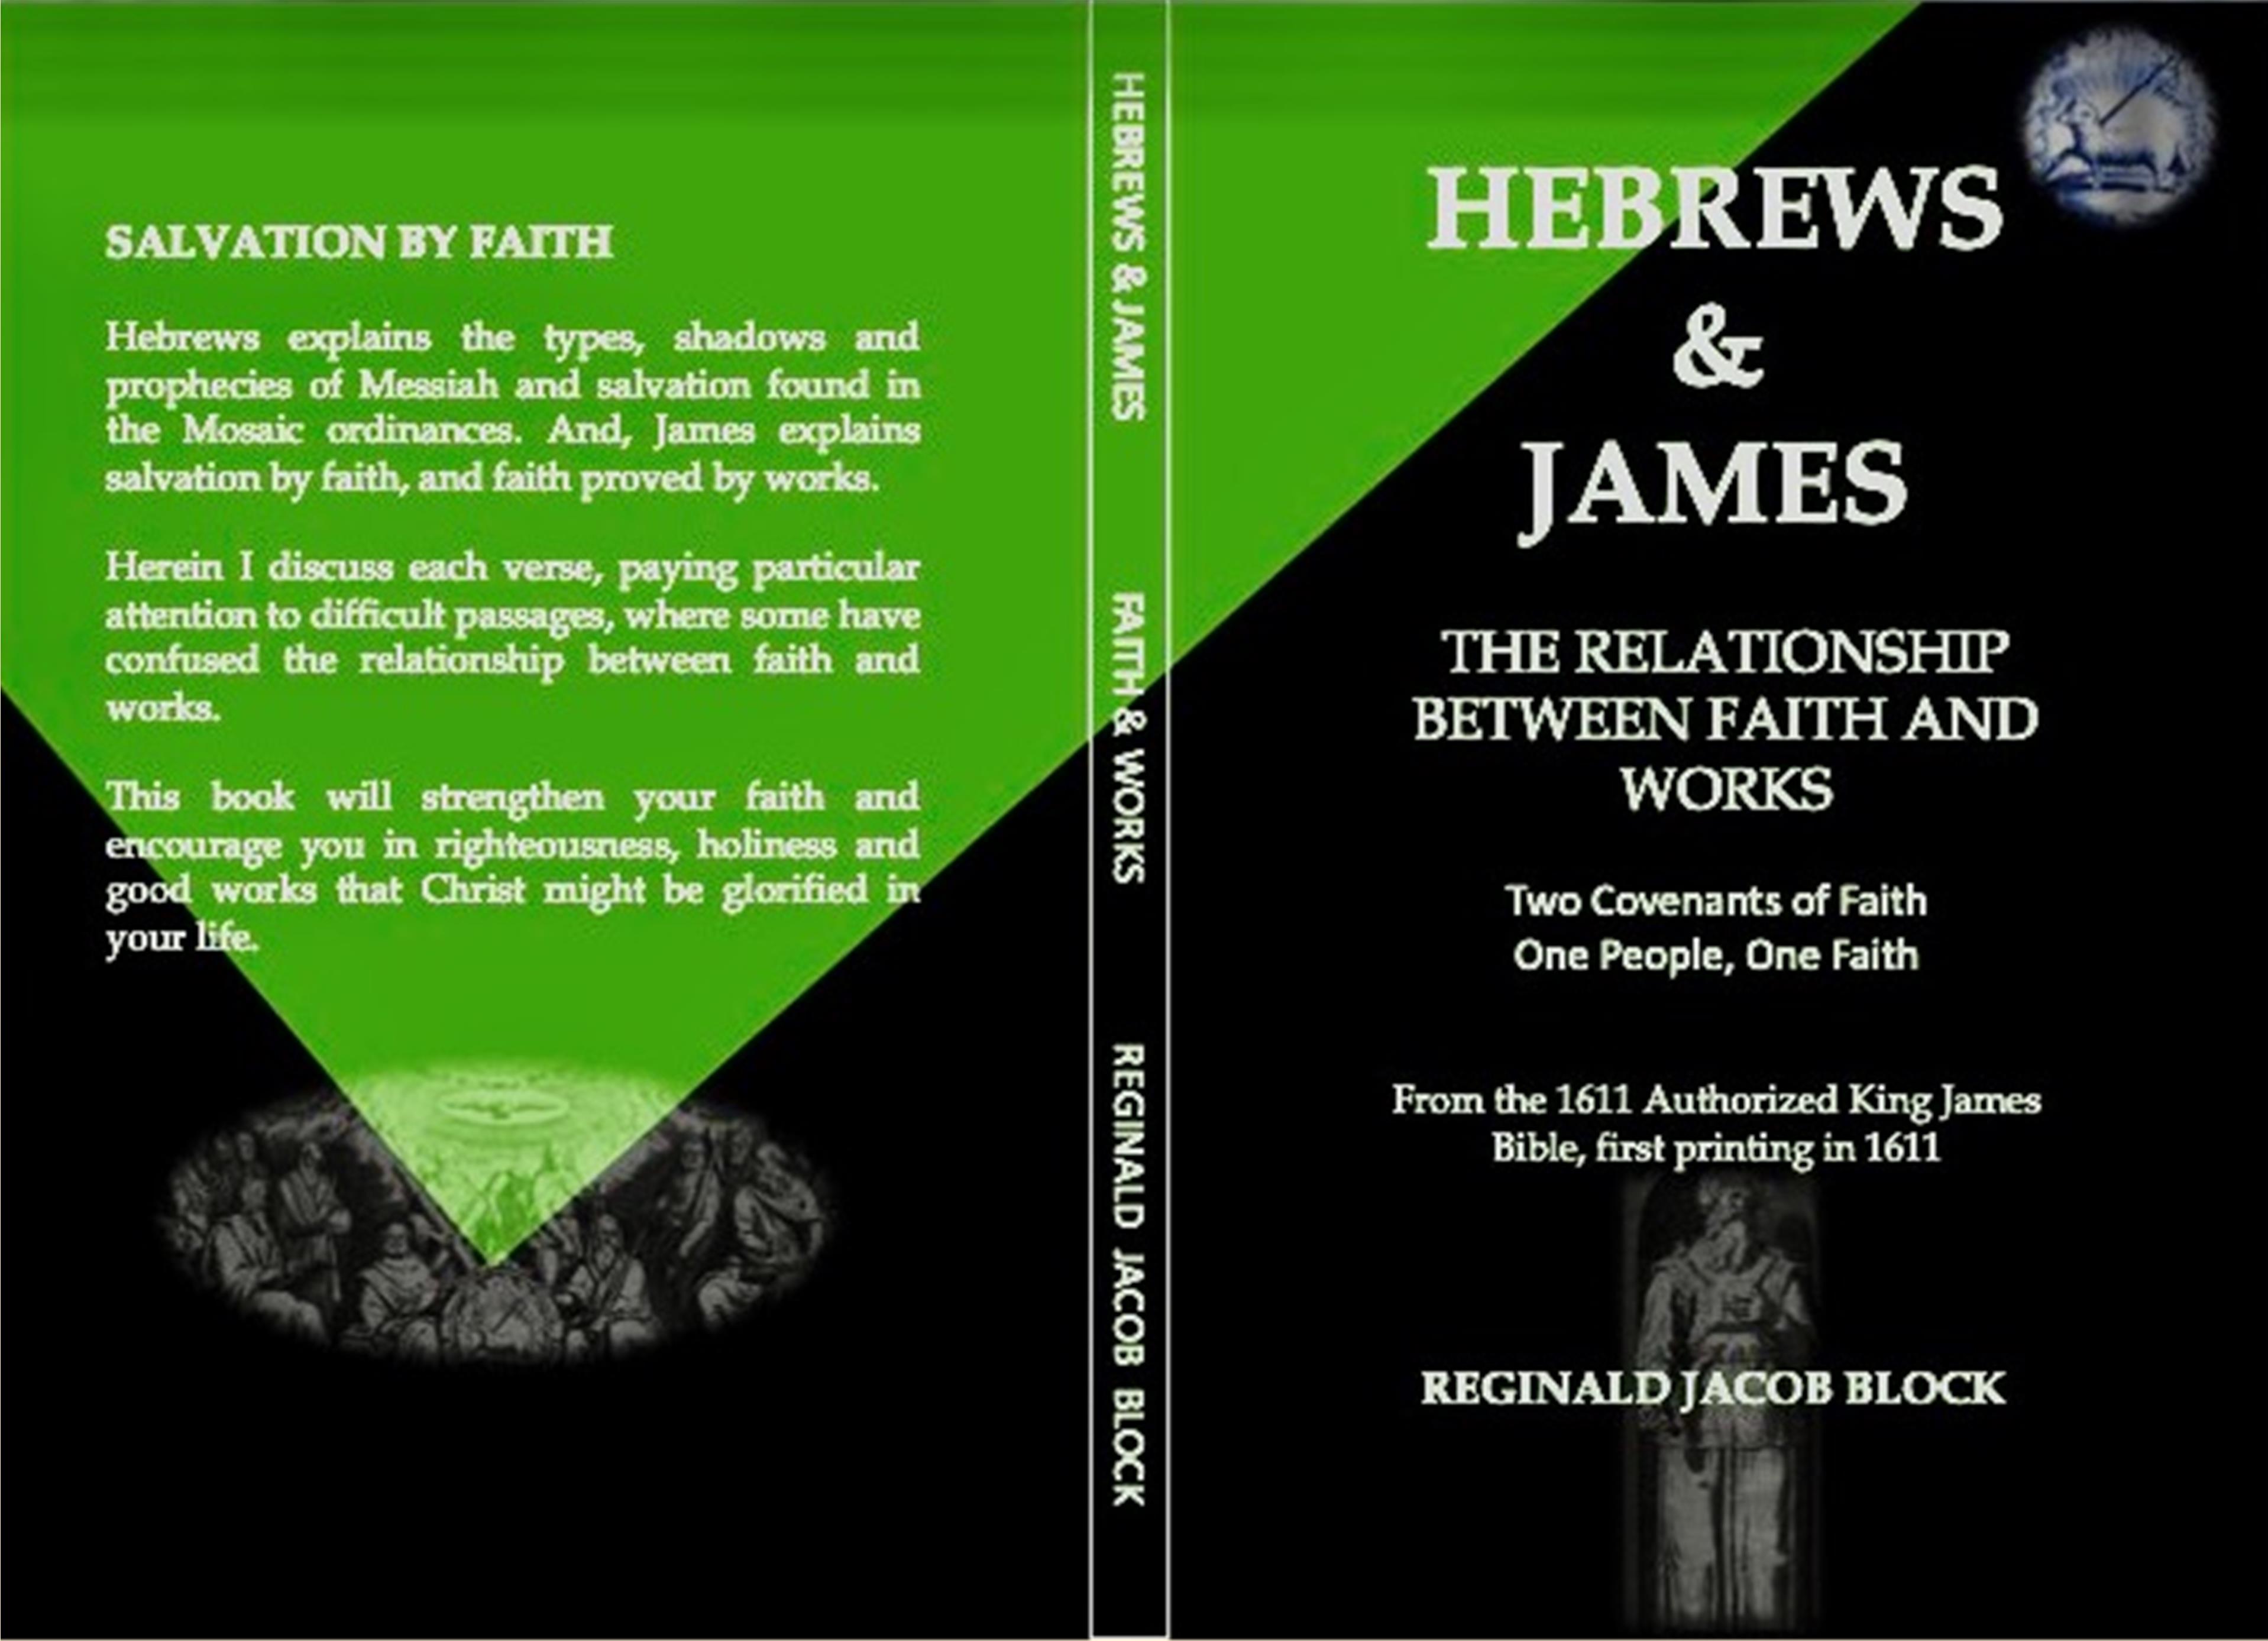 HEBREWS & JAMES COMMENTARY cover image